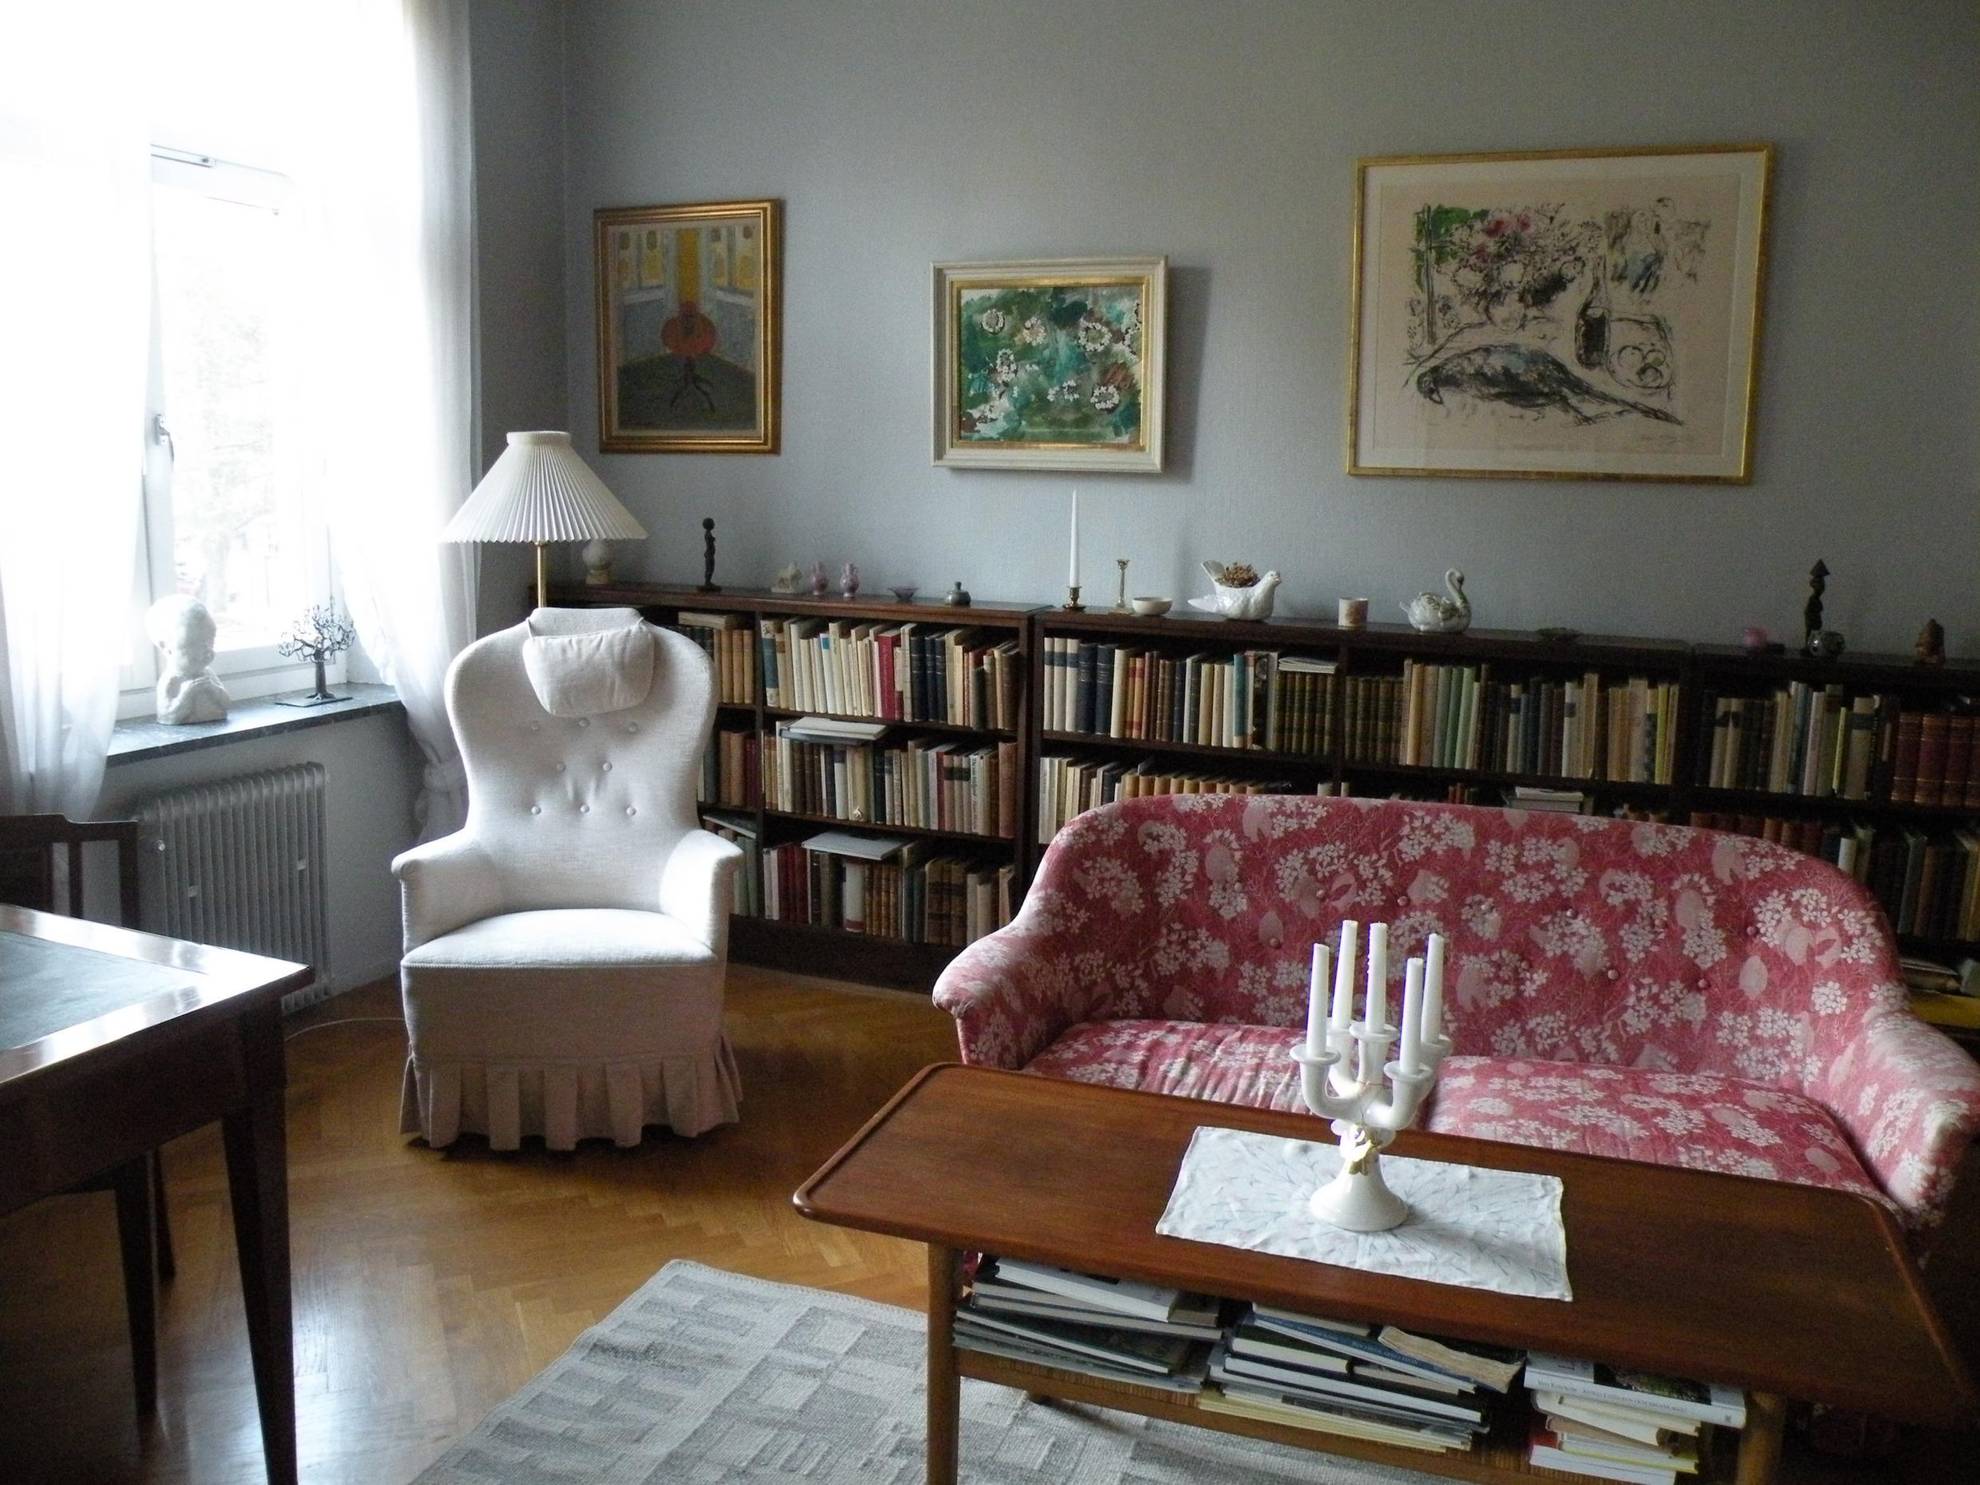 Astrid Lindgren's living room, with a reading chair, a large bookshelf with bibelots on top, a patterned, red couch and a few paintings on the wall.